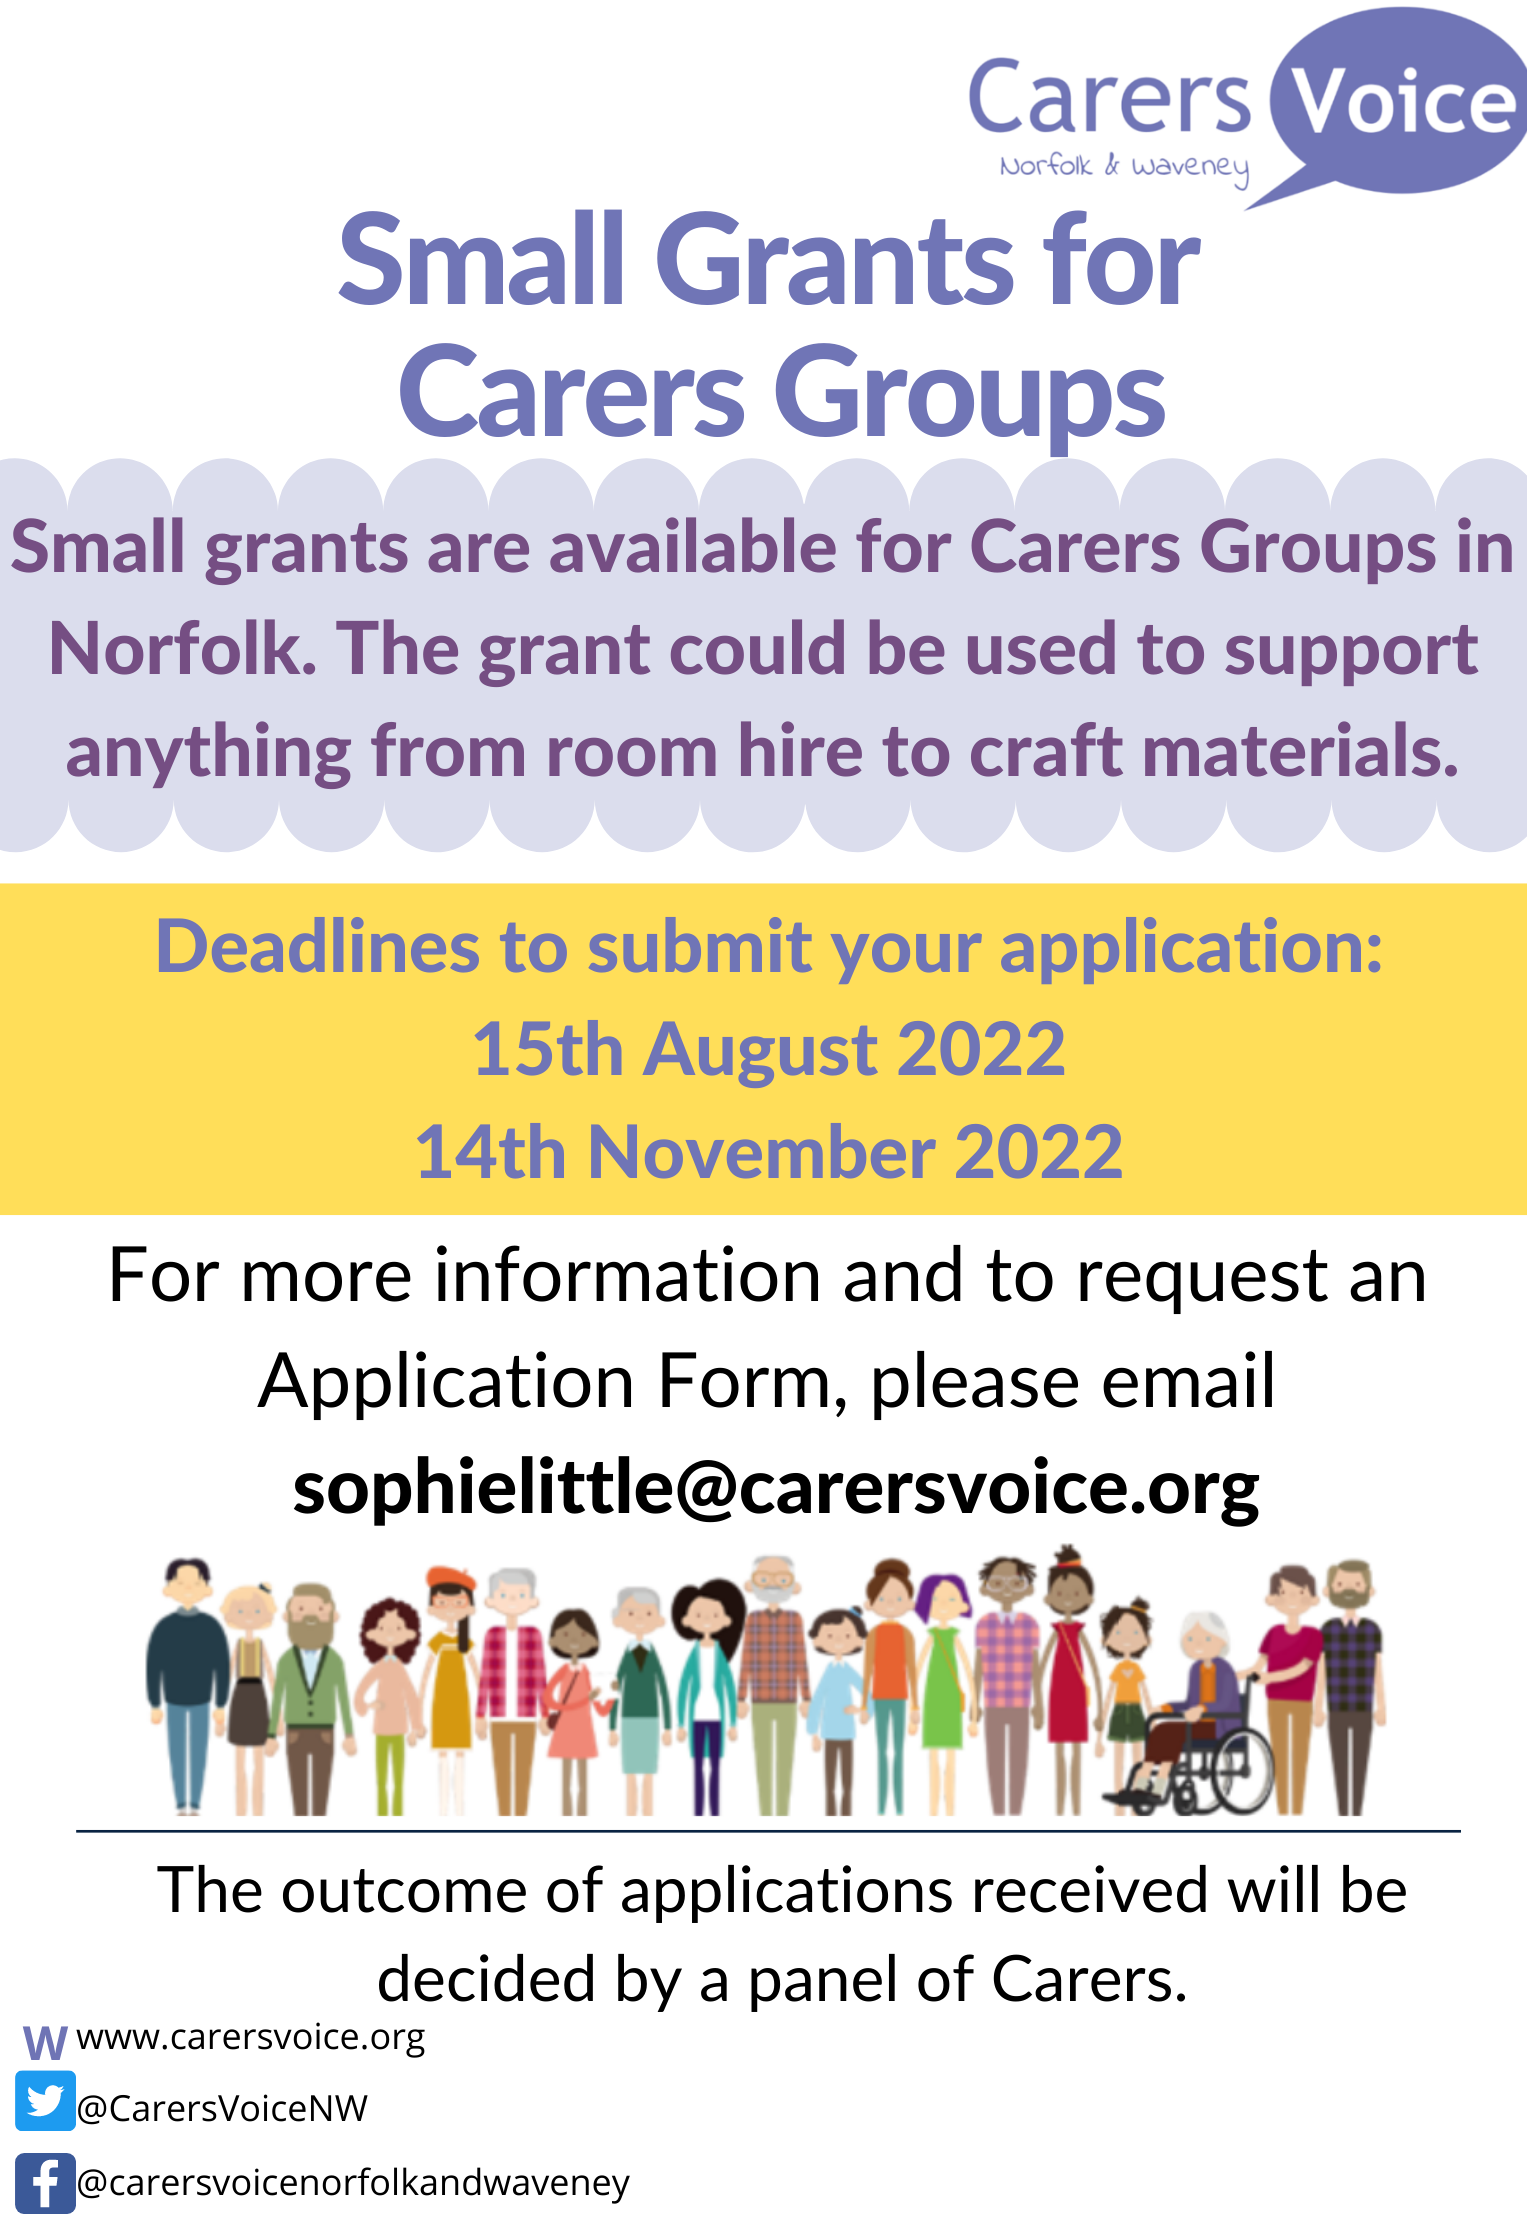 Carers Voice small grants